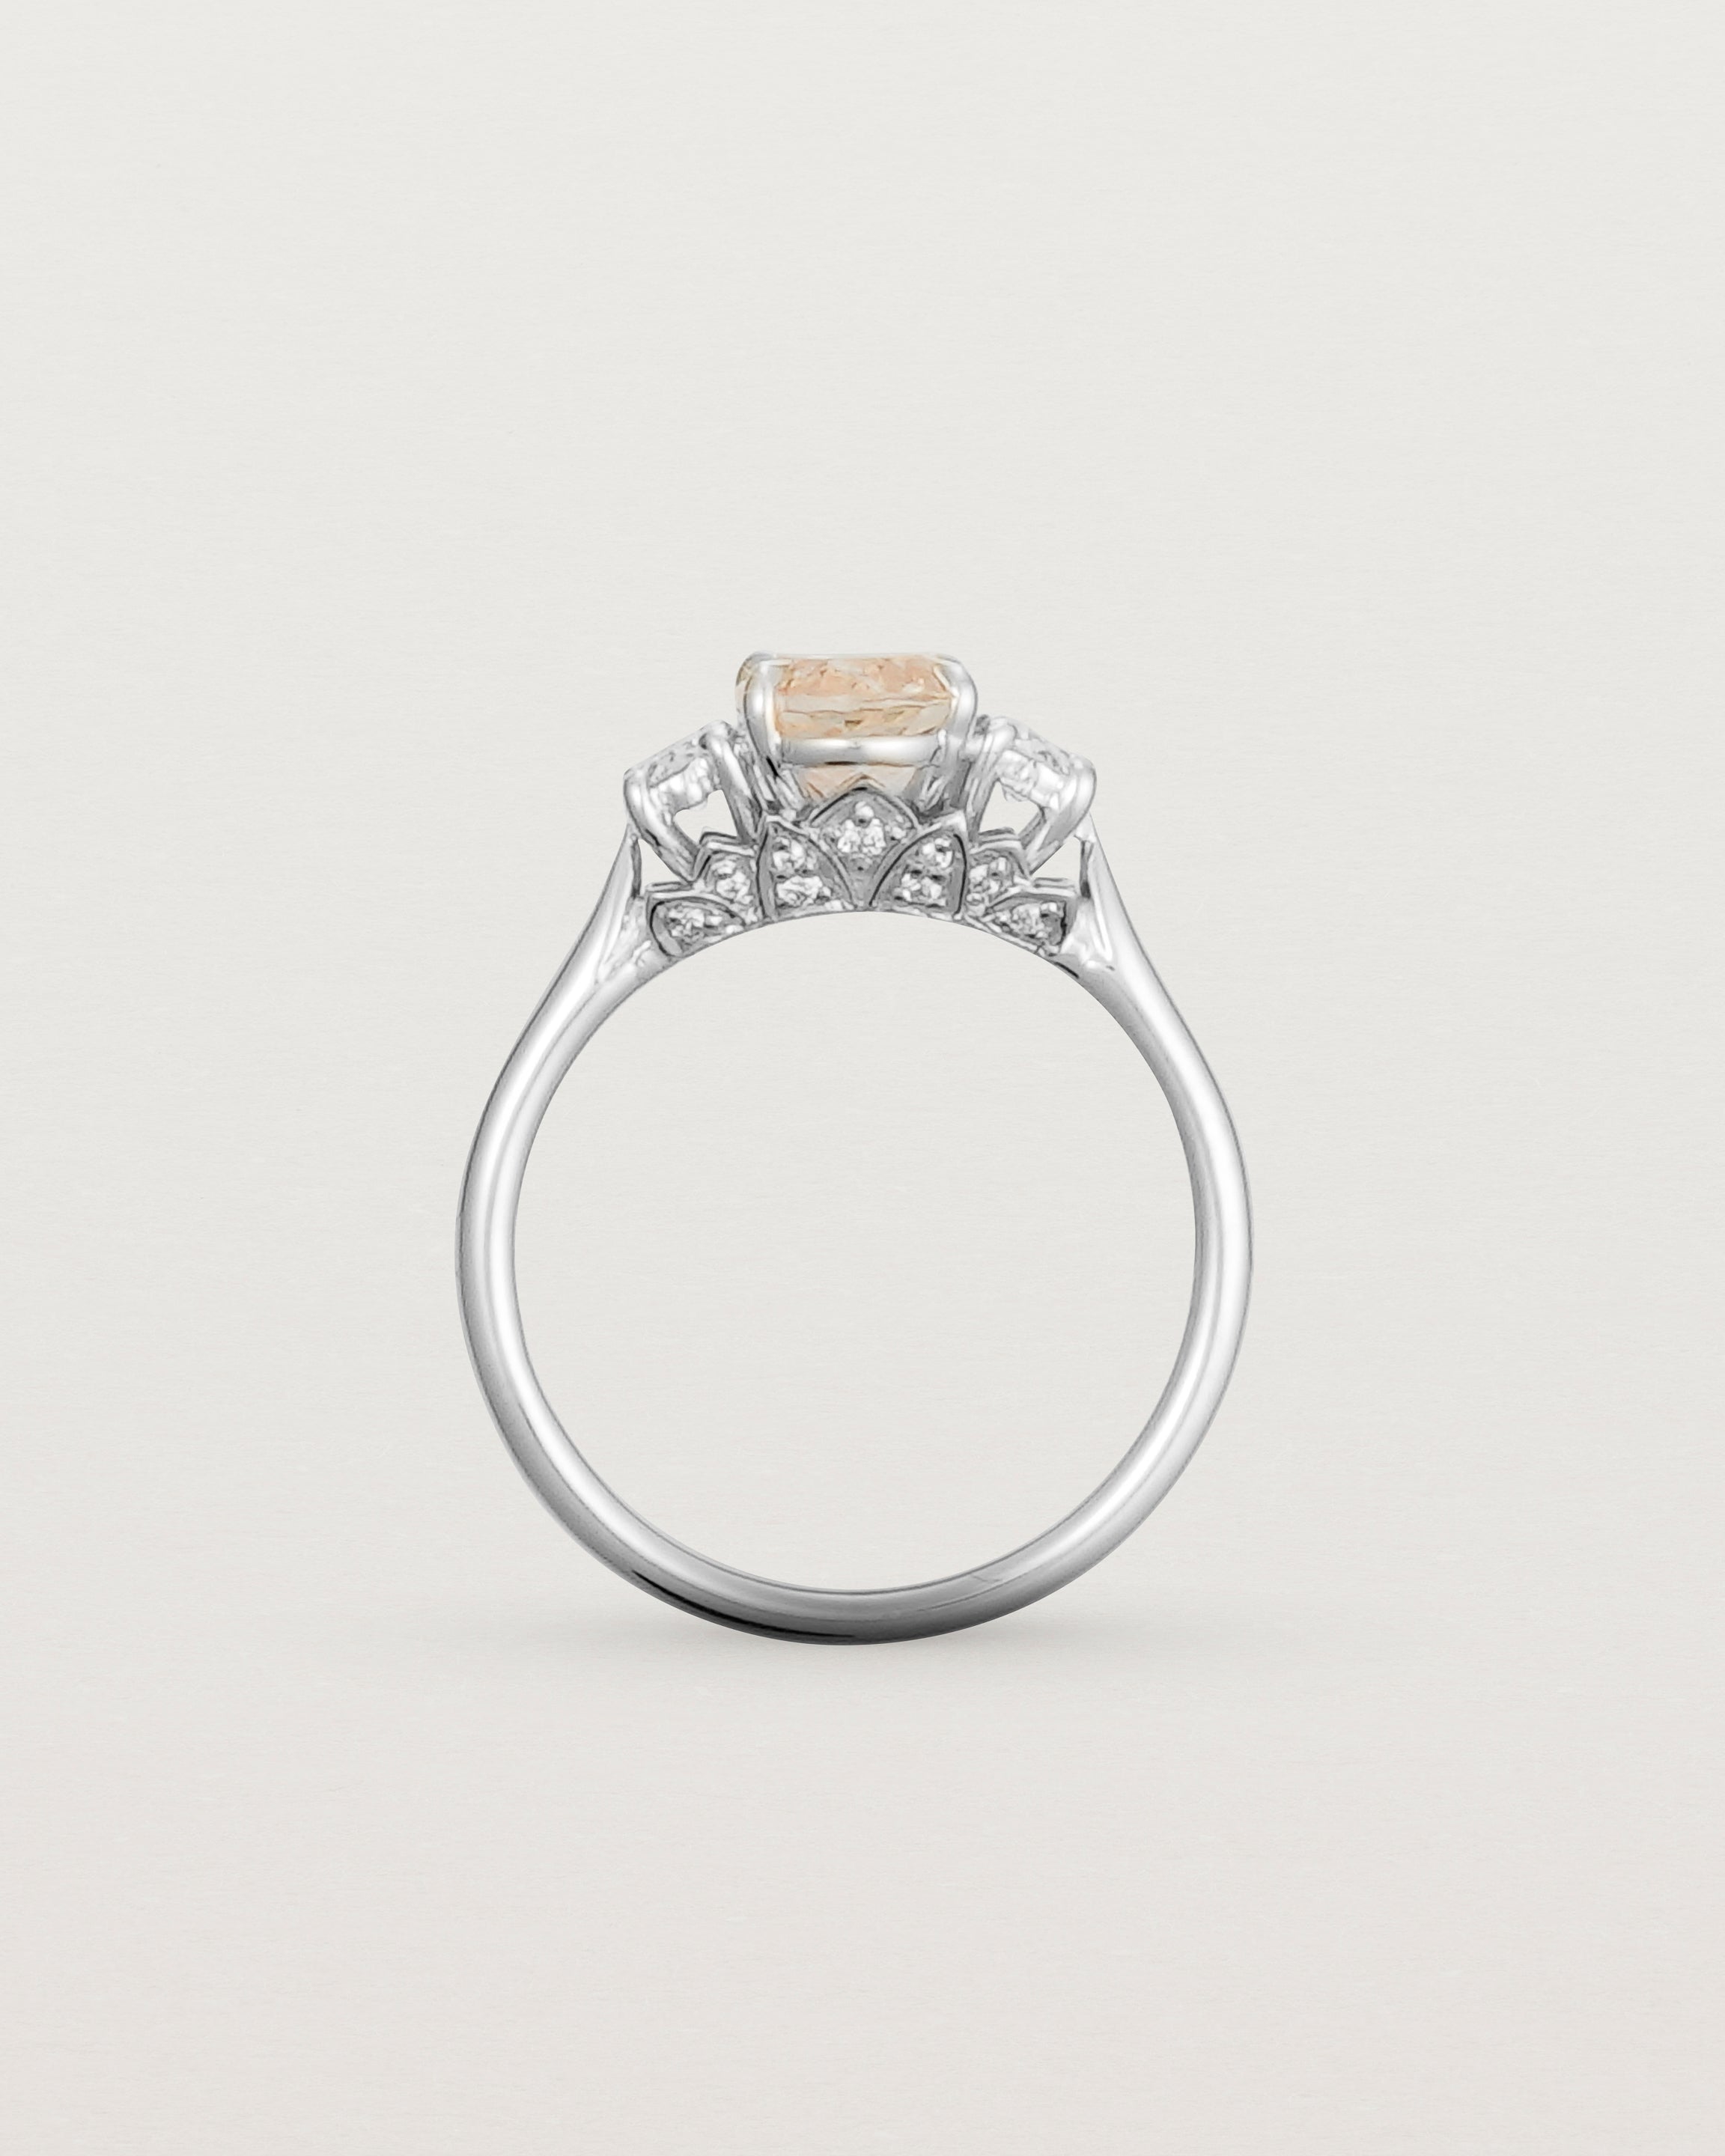 Standing view of the Laurel Oval Trio Ring | Savannah Sunstone | White Gold.